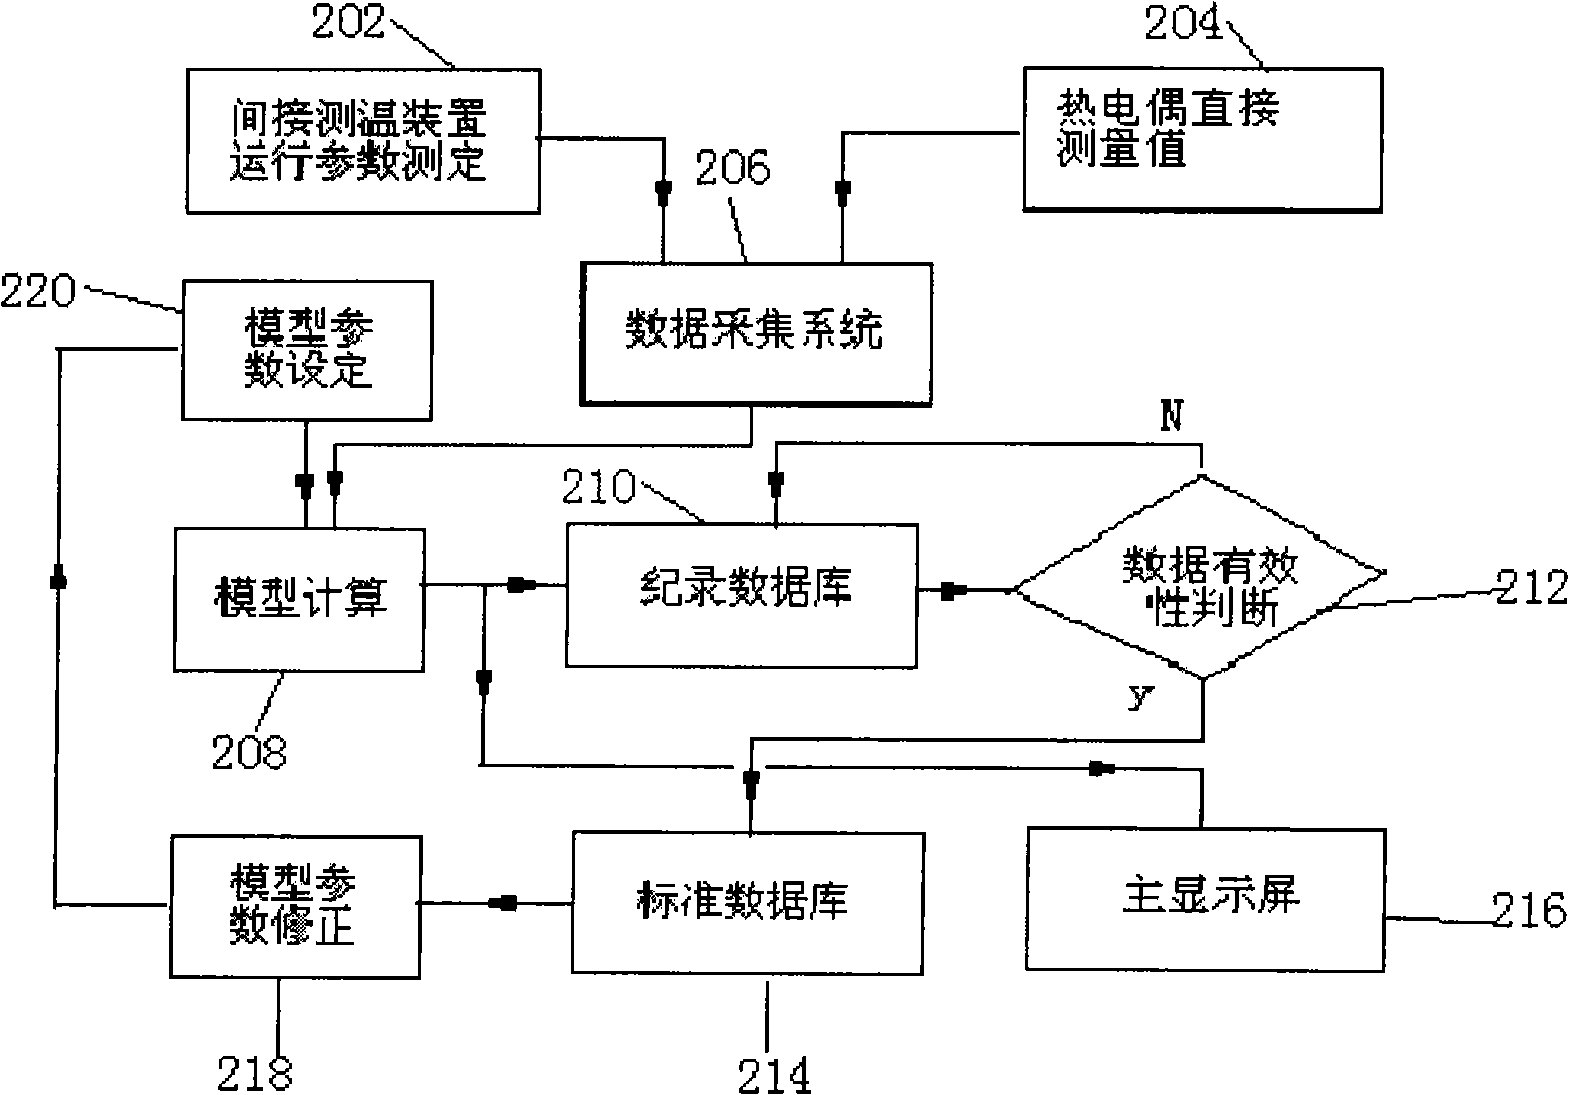 System for measuring temperature of coal gas flow bed gasification reactor and method for measuring temperature of coal gas flow bed gasification reactor using the same